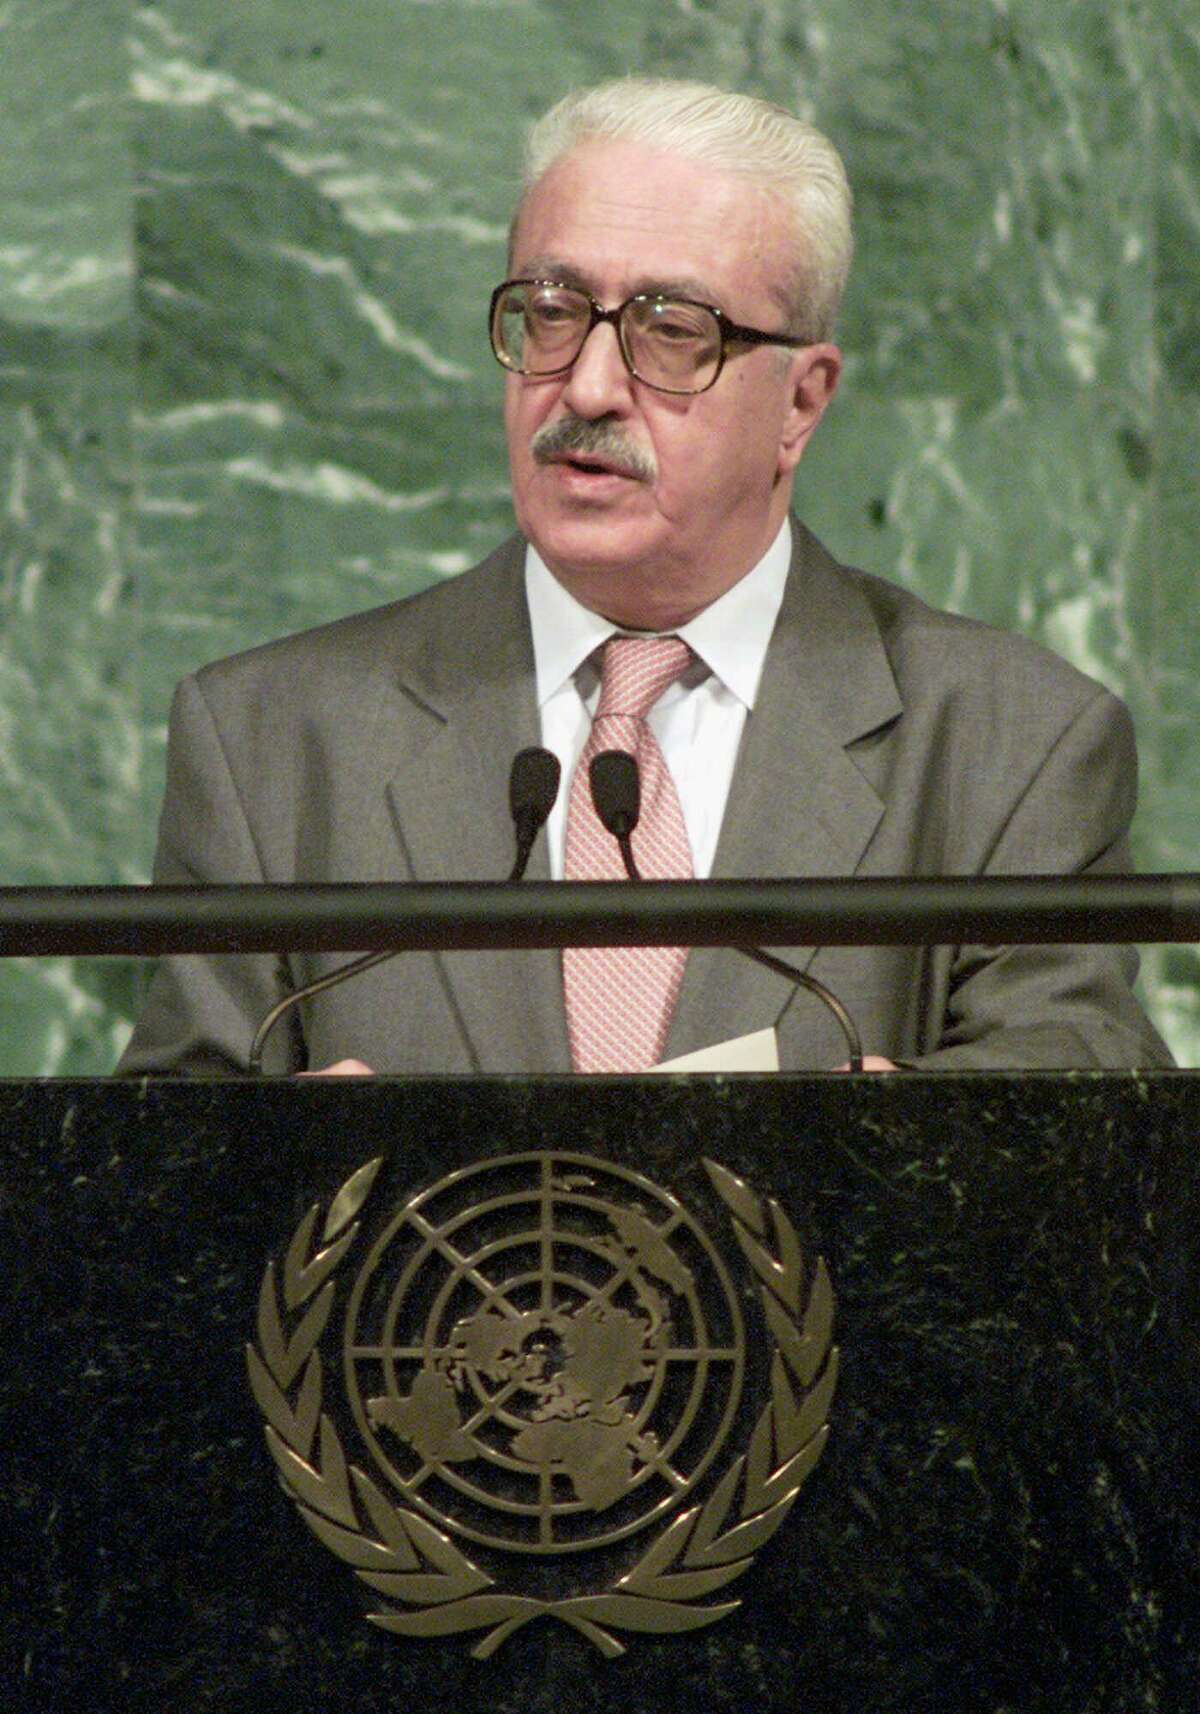 FILE - In this Thursday, Sept. 7, 2000, file photo, Iraqi Foreign Minister Tariq Aziz speaks during the U.N. Millennium Summit at the United Nations. Tariq Aziz, the debonair Iraqi diplomat who made his name by staunchly defending Saddam Hussein to the world during three wars and was later sentenced to death as part of the regime that killed hundreds of thousands of its own people, has died in a hospital in southern Iraq. He was 79. (AP Photo/Richard Drew, File)